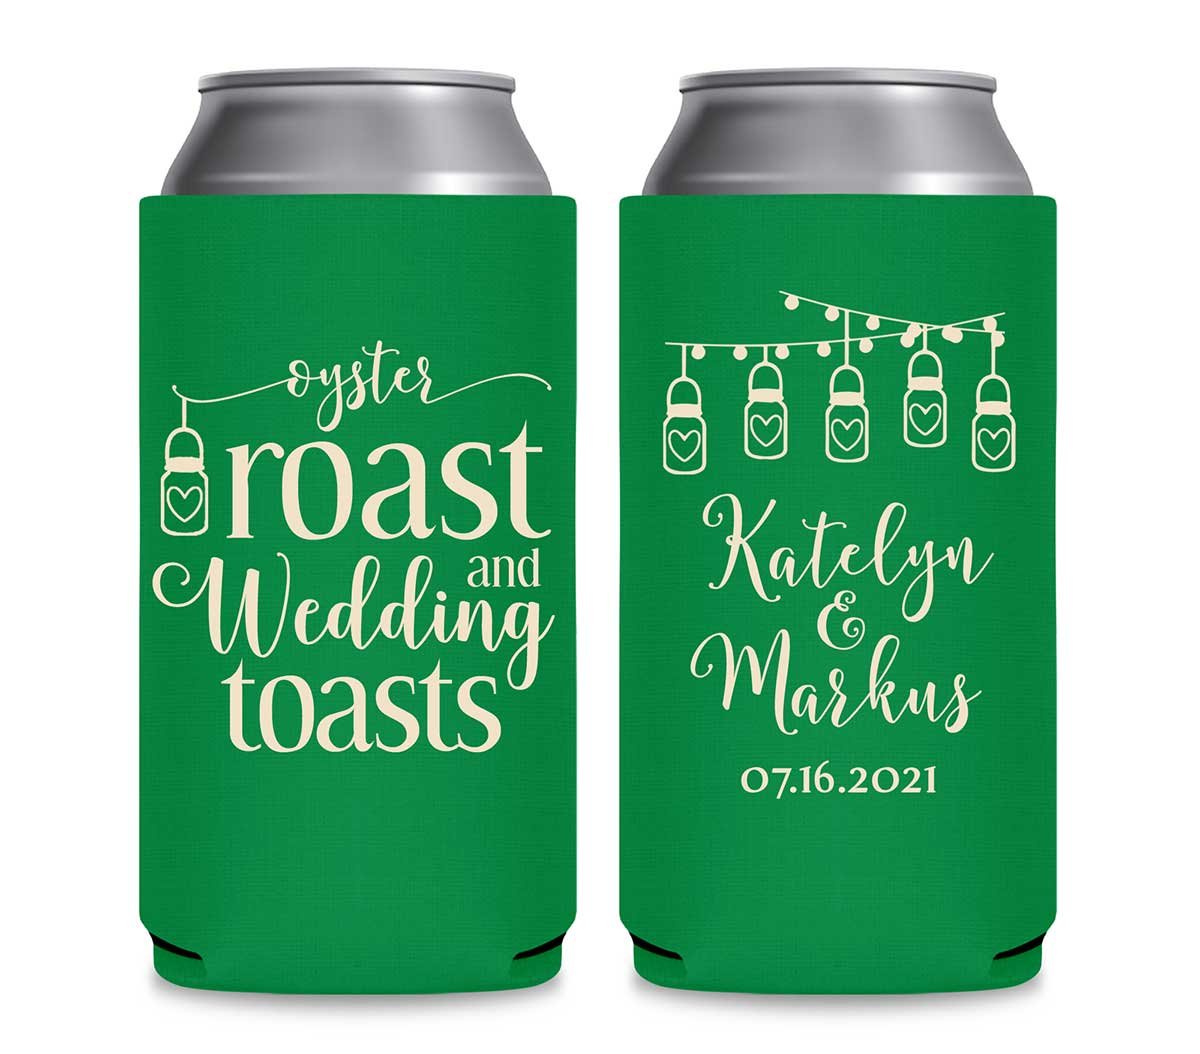 Oyster Roast & Wedding Toasts 1A Foldable 12 oz Slim Can Koozies Wedding Gifts for Guests